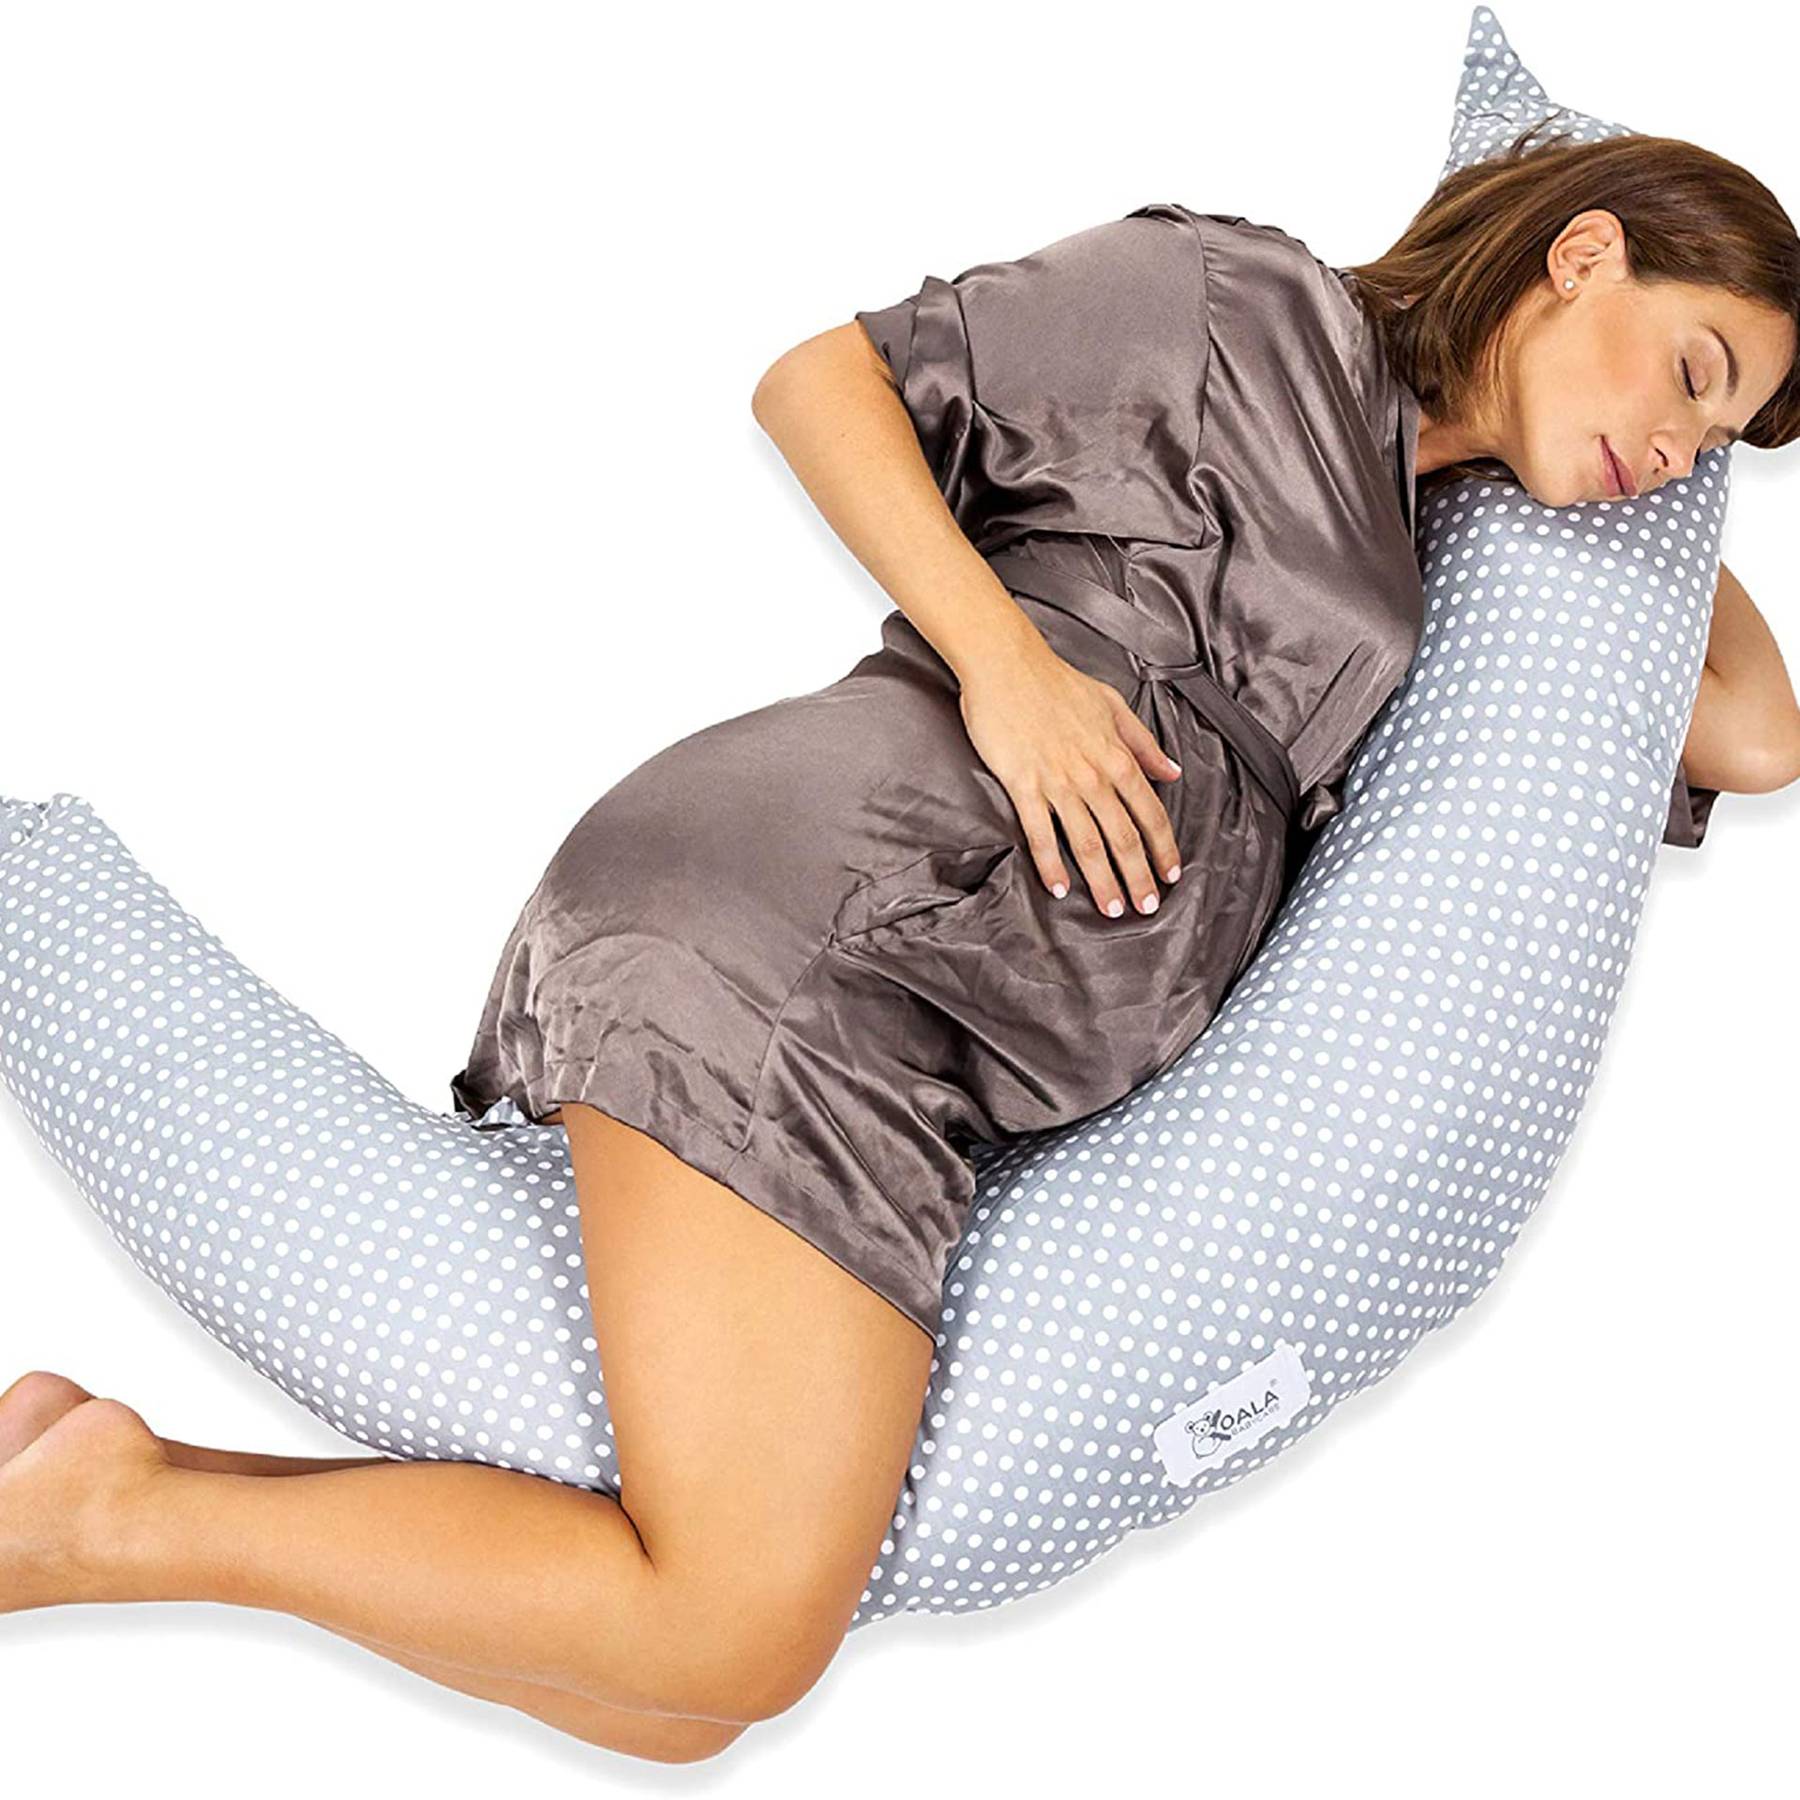 The Best Body Pillows 2021 13 Body And Maternity Pillows To Maximise